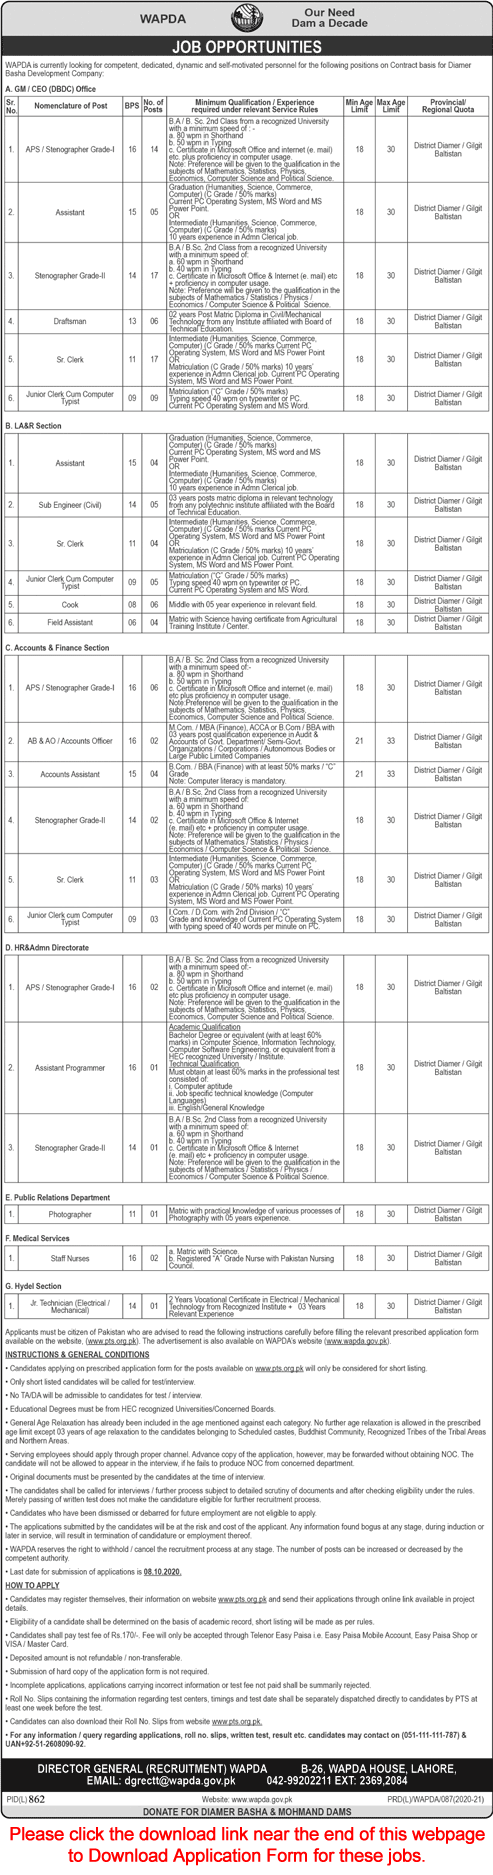 WAPDA Jobs September 2020 PTS Application Form Stenographers, Clerks & Others Latest